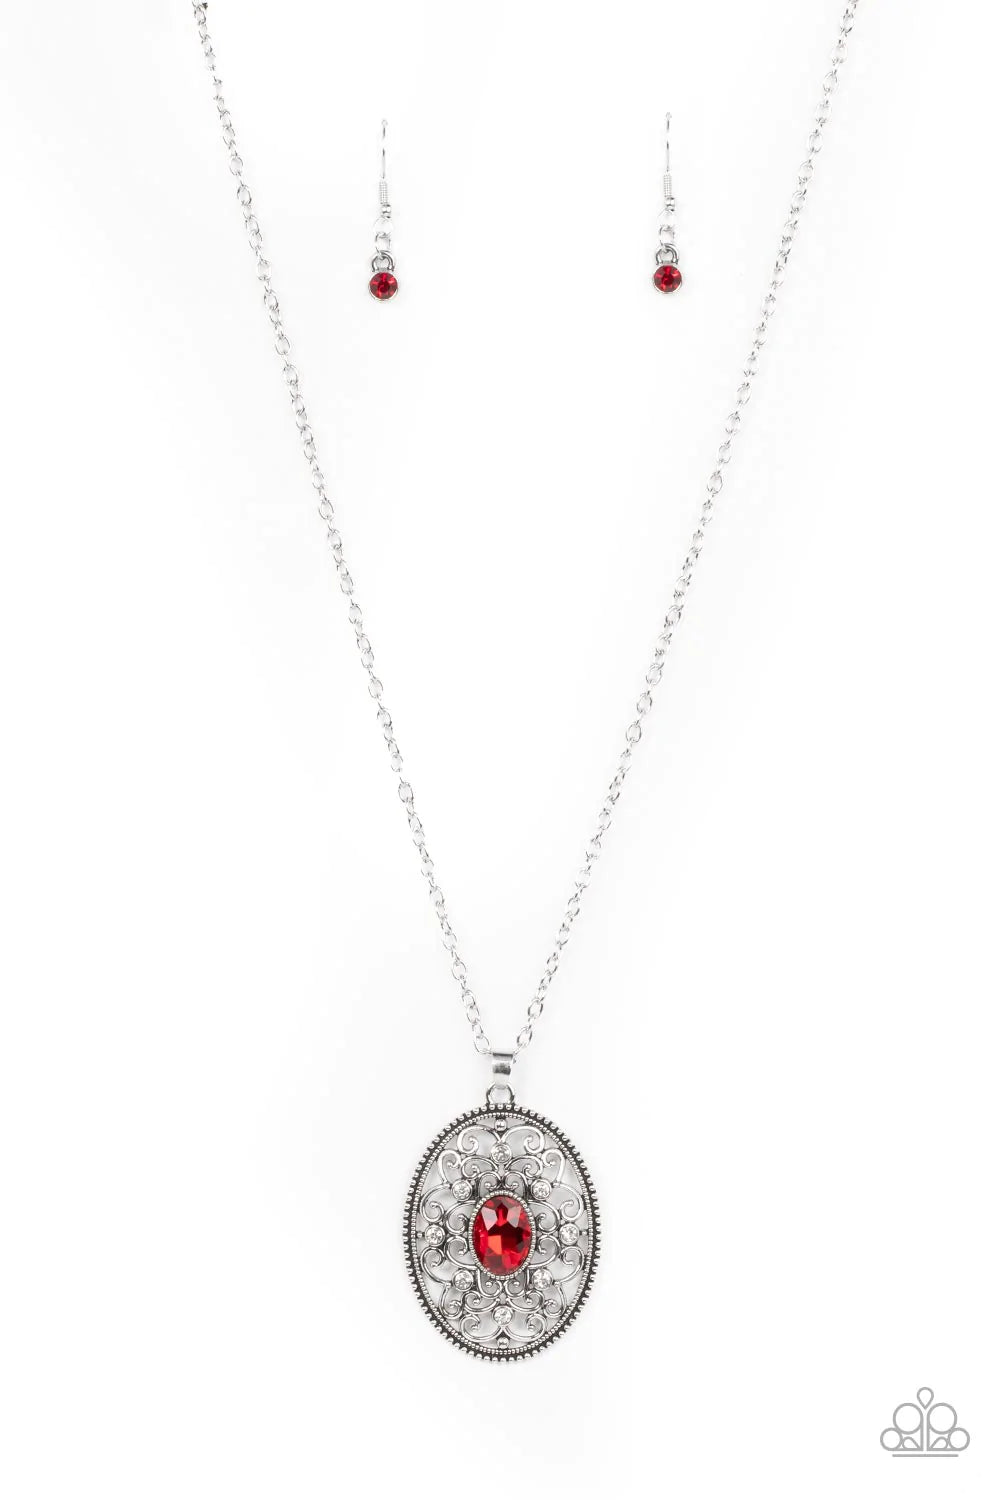 Paparazzi Accessories Sonata Swing - Red Dainty white rhinestones are sprinkled across silver vine-like filigree that whirls around an oval red gem center inside of a studded silver frame, resulting in a whimsical pendant at the bottom of a silver chain.